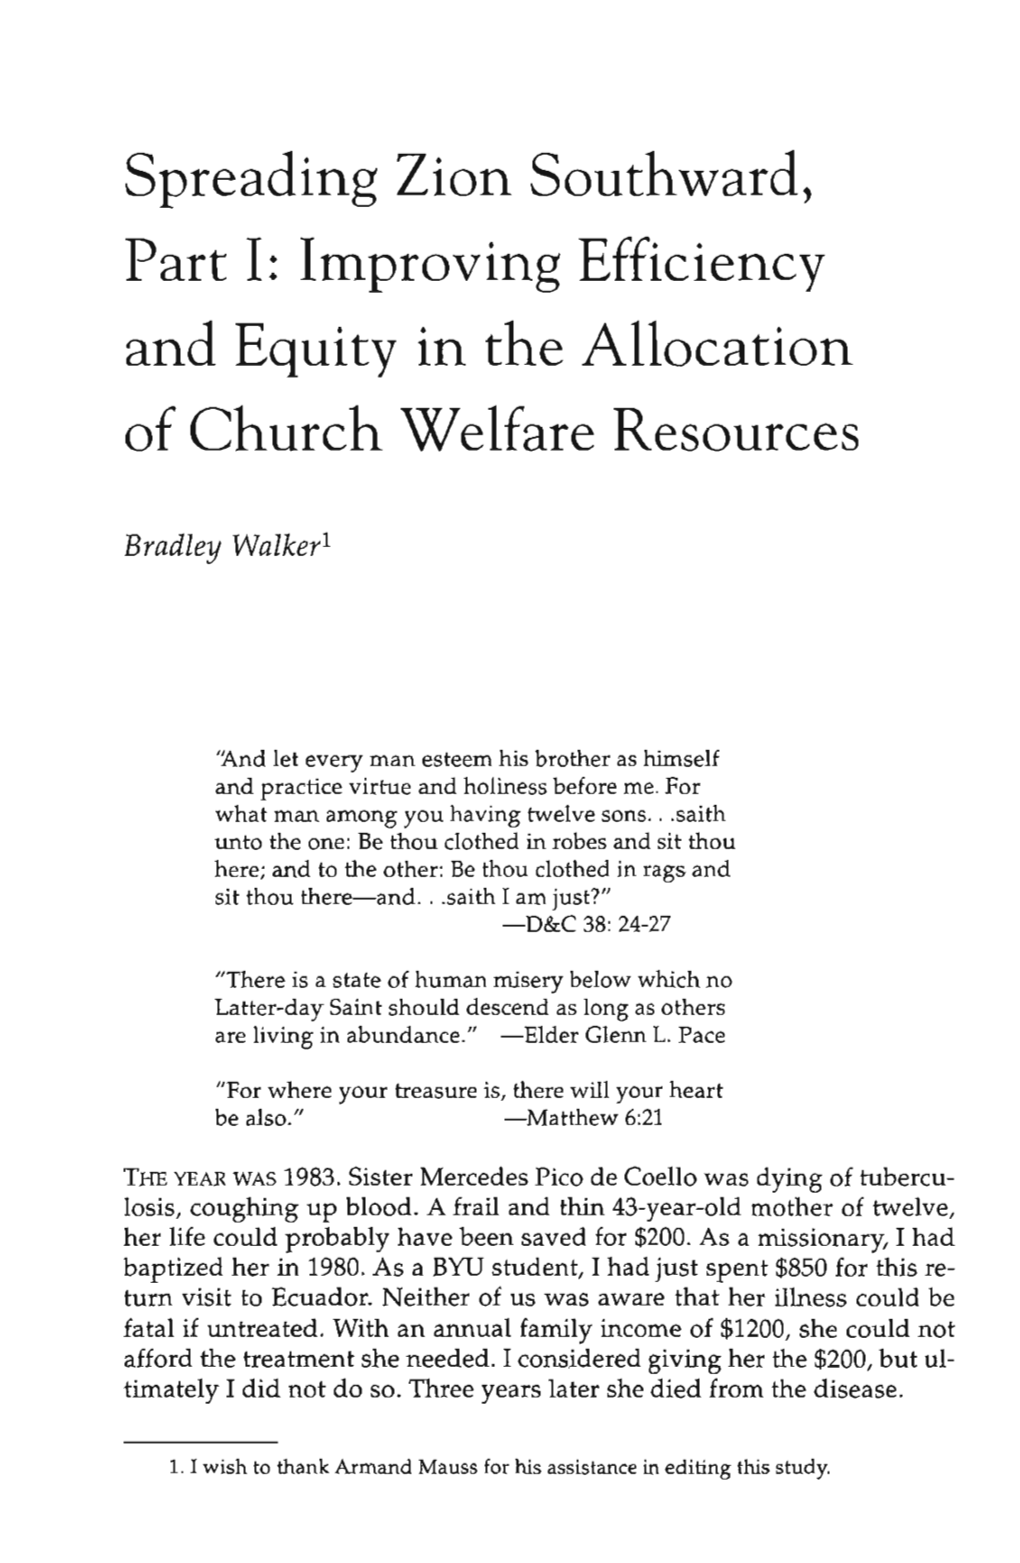 Spreading Zion Southward, Part I: Improving Efficiency and Equity in the Allocation of Church Welfare Resources